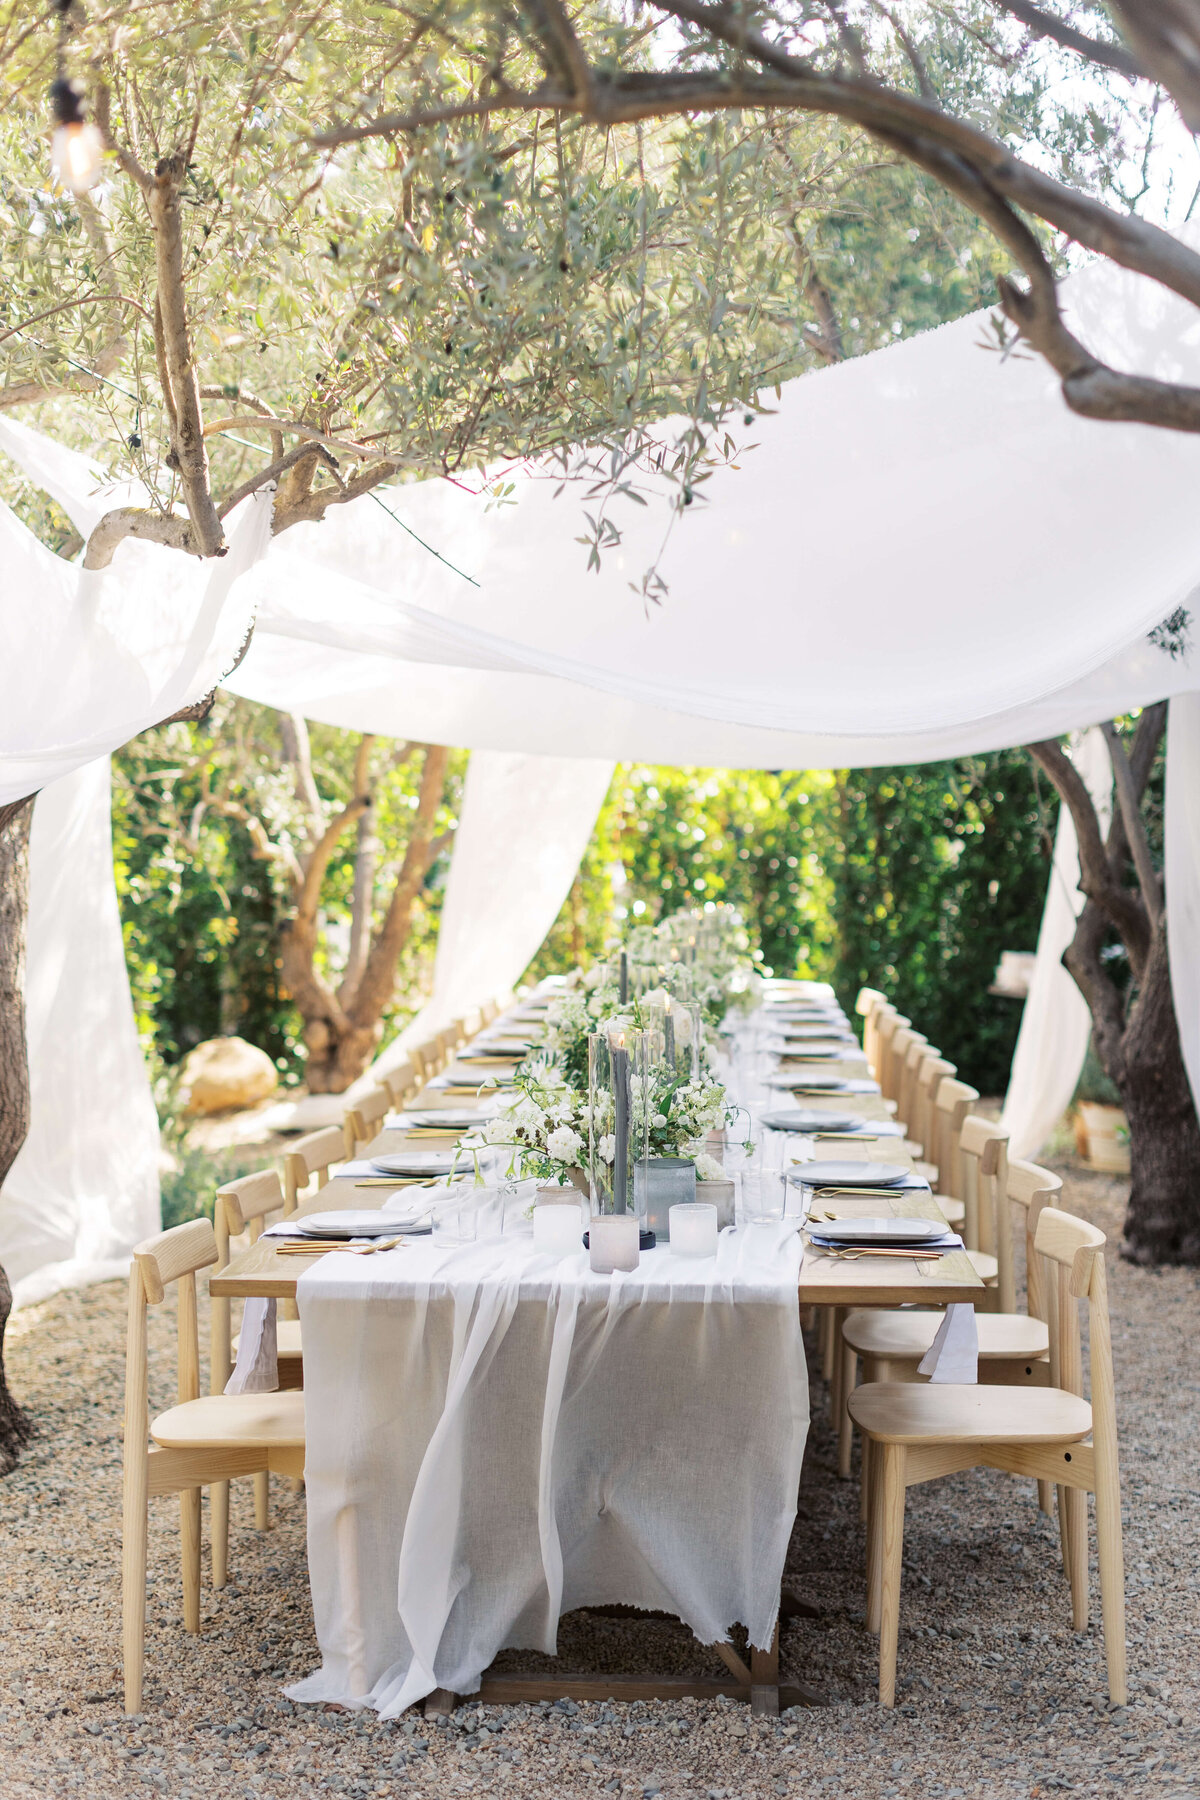 Intimate reception table draped with linens.